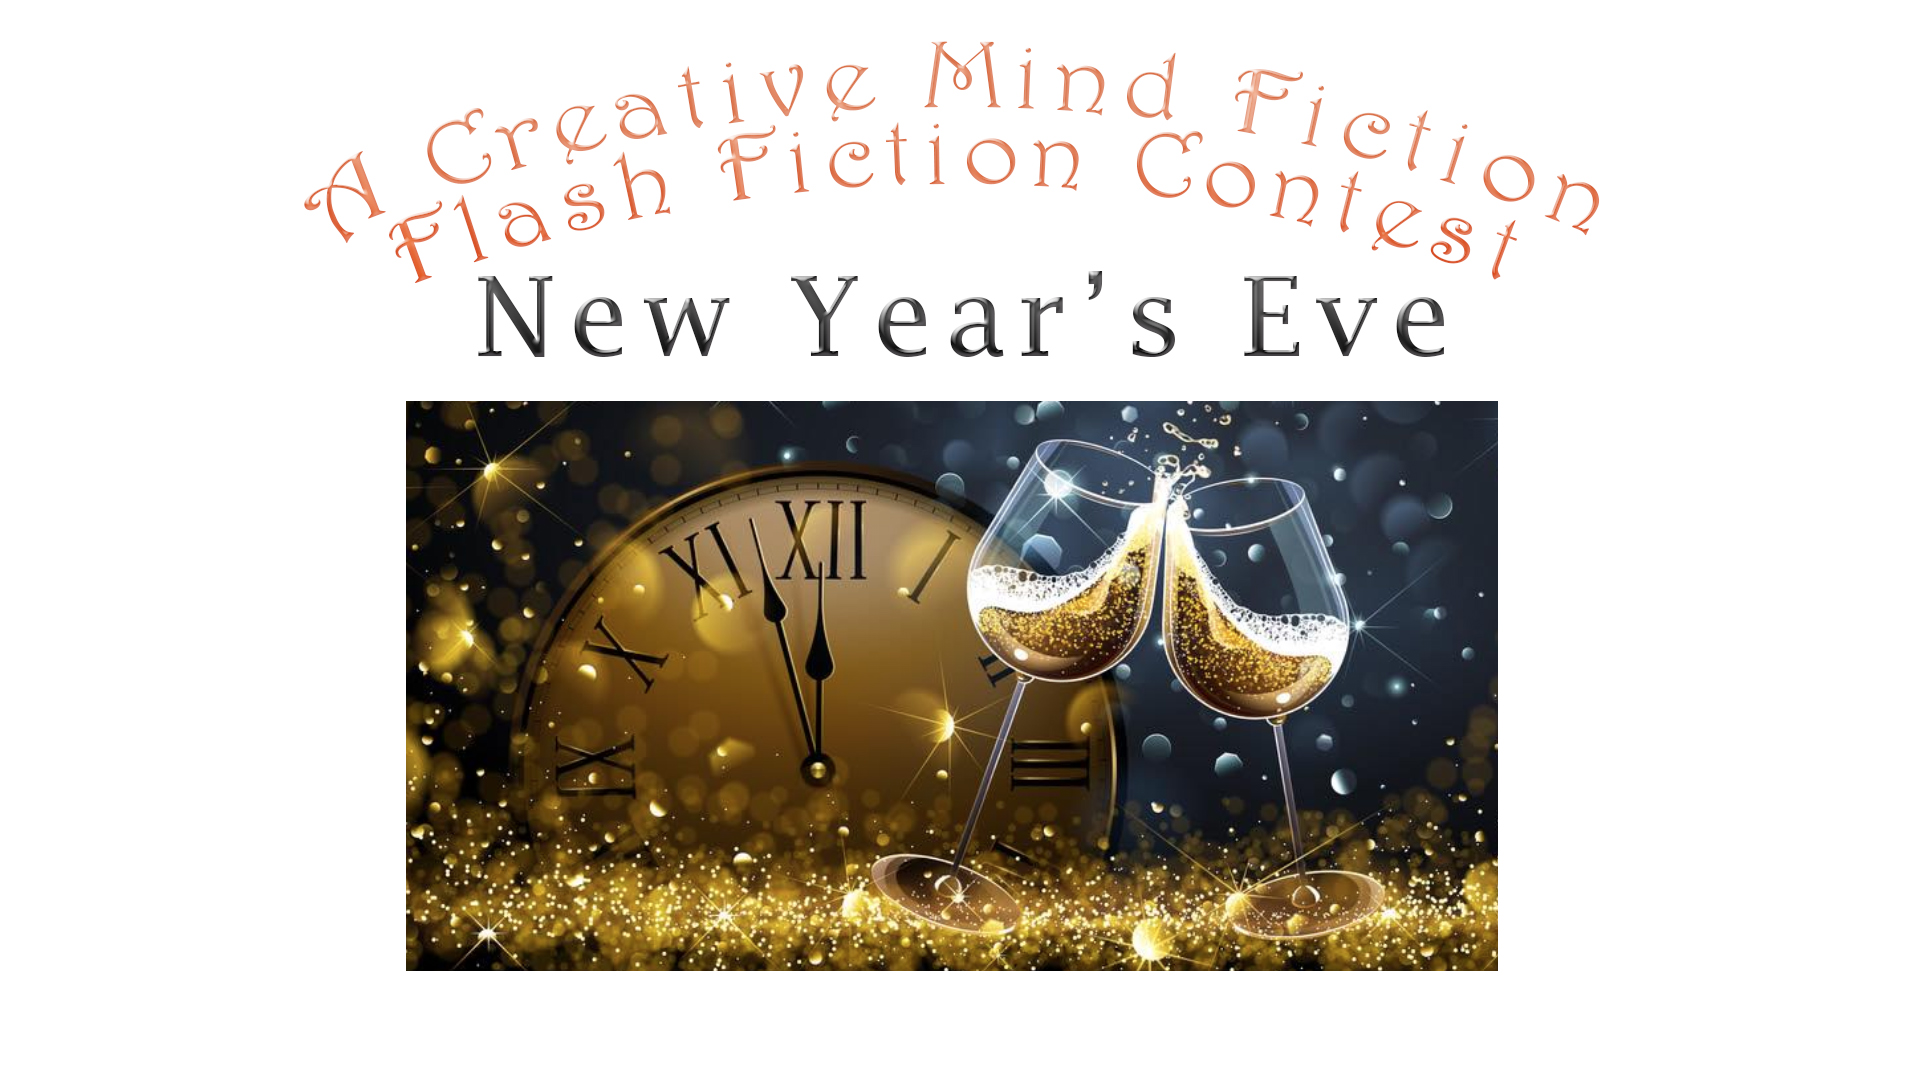 December 20, 2018 - January 2, 2019 Flash Fiction Contest “New Year's Eve"